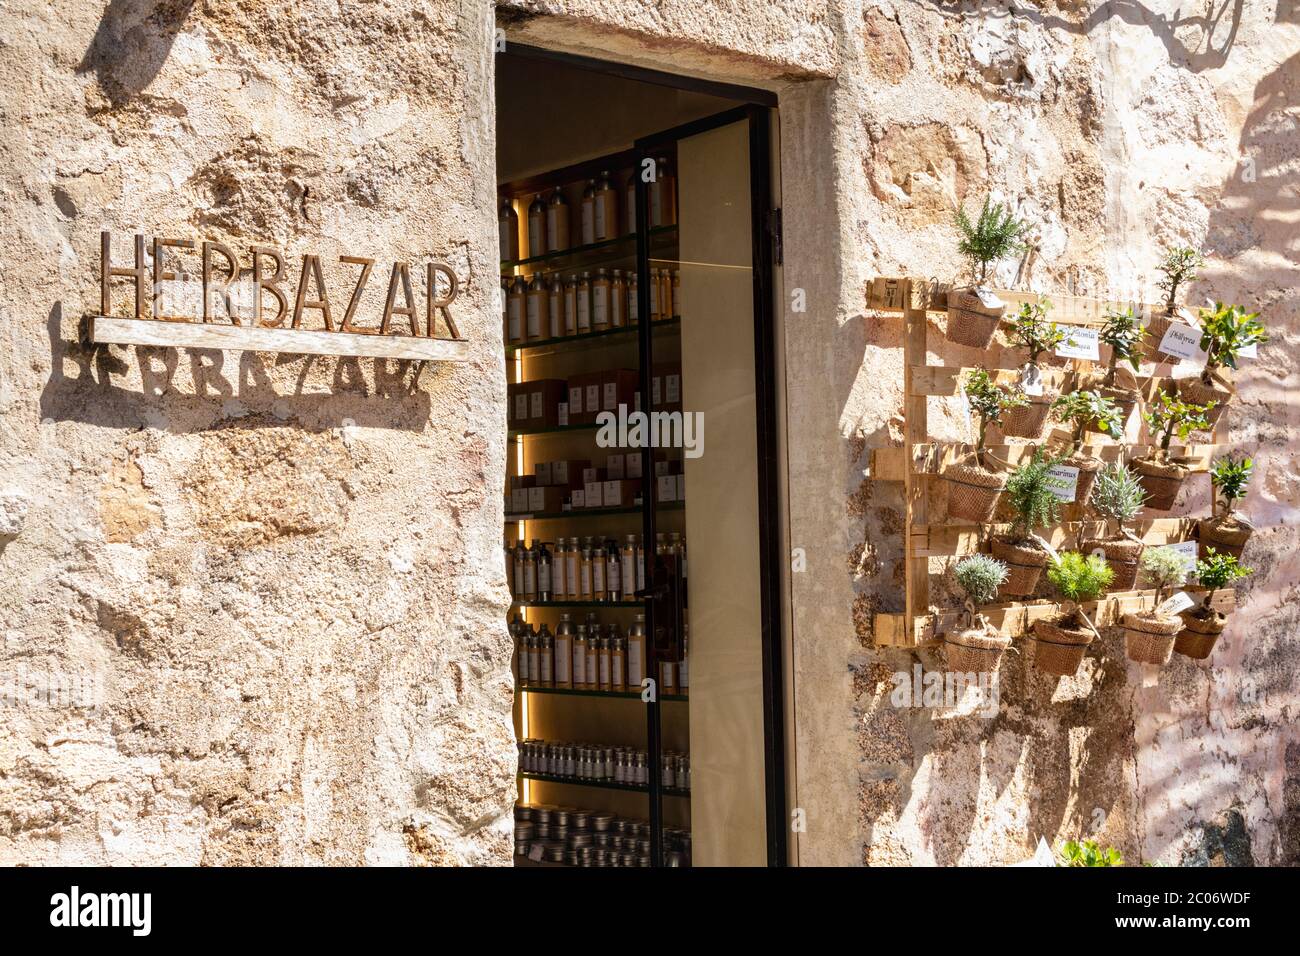 Entrance to a Herbalist Shop in San Pantaleo, Containers of Remedies Line the Shelf Inside the Door and Medicinal Plants are Displayed Outside. Stock Photo